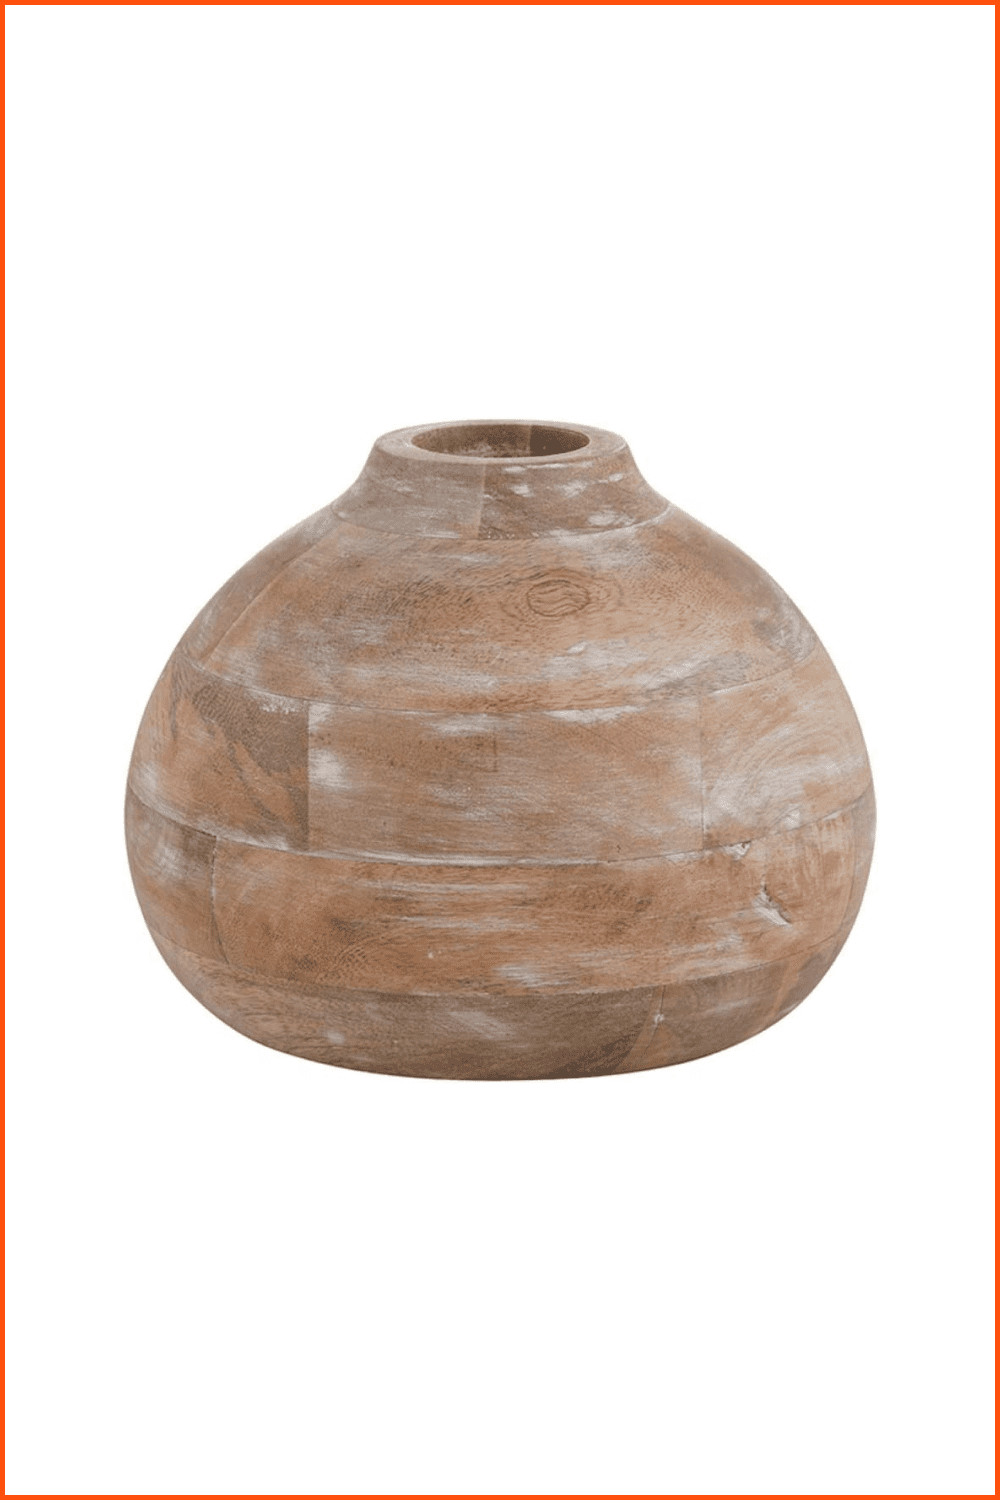 Decorative round low flower vase made of wood.